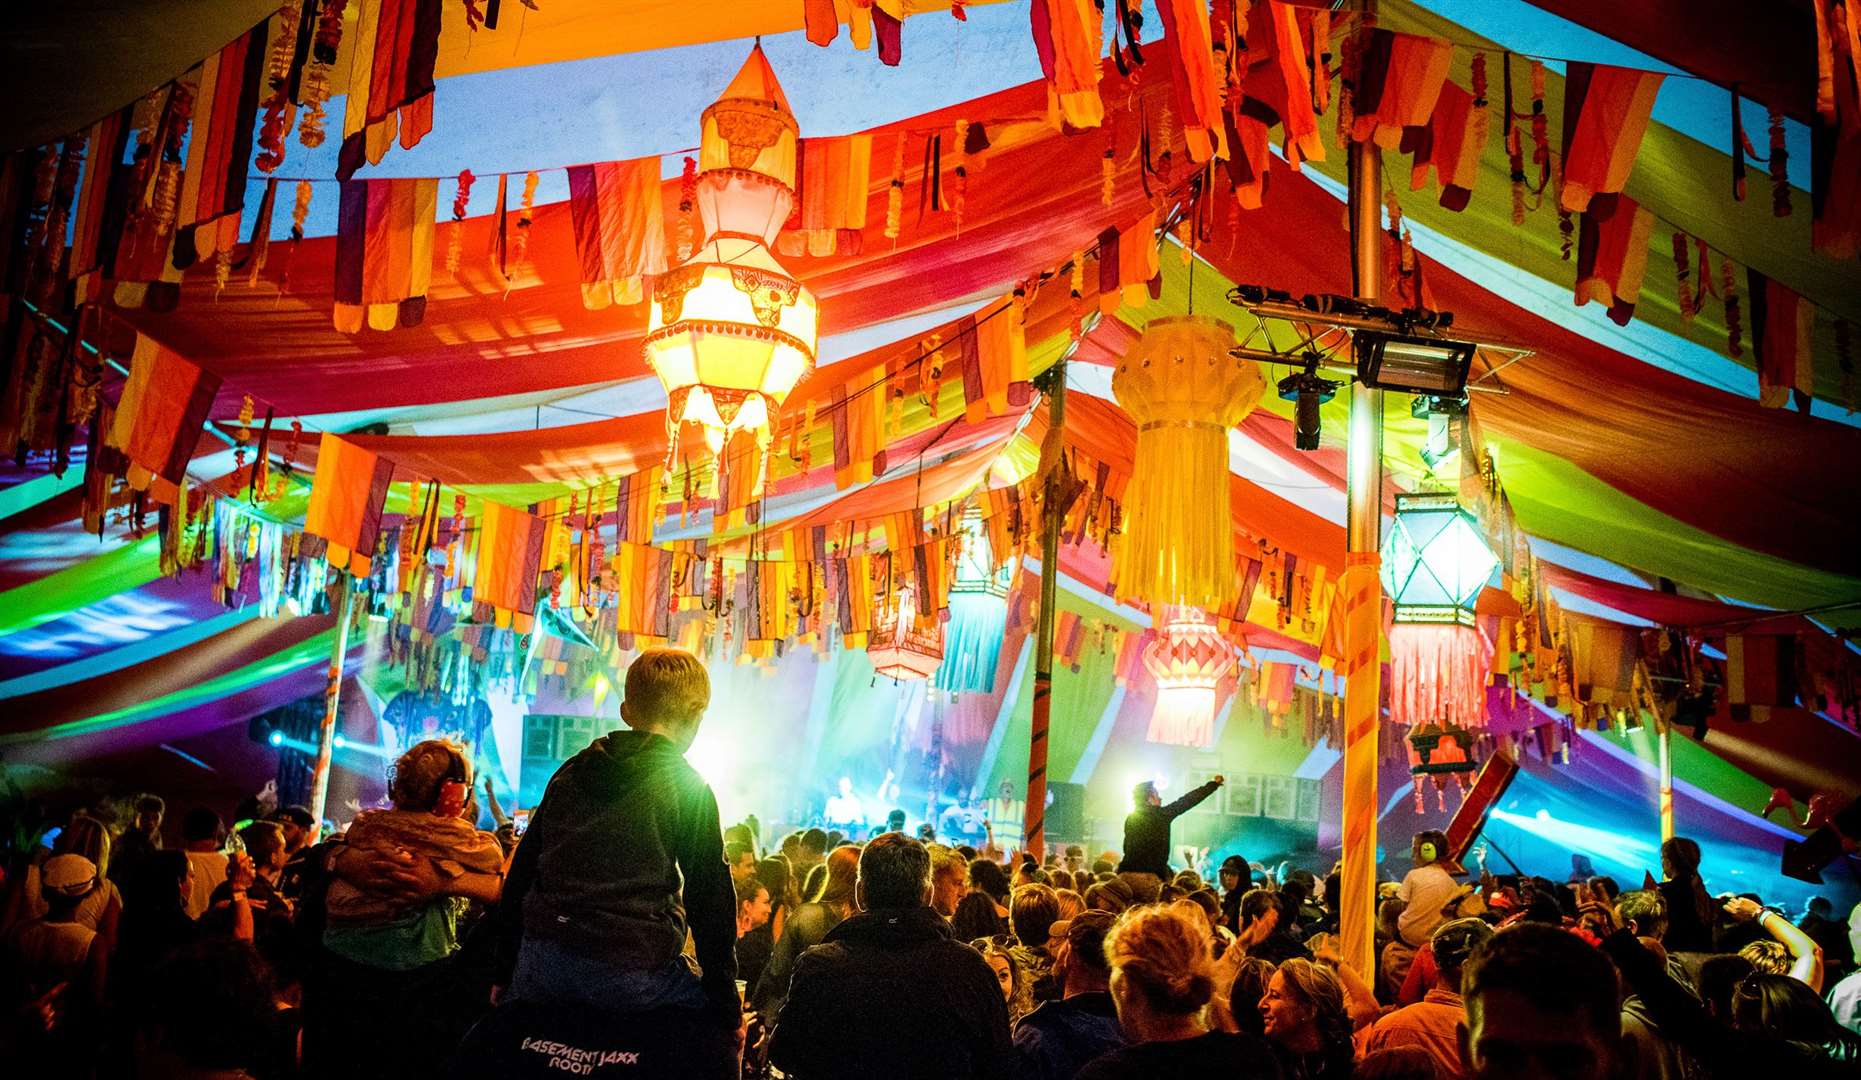 Camp Bestival is at Dreamland for Easter, culminating in a takeover day